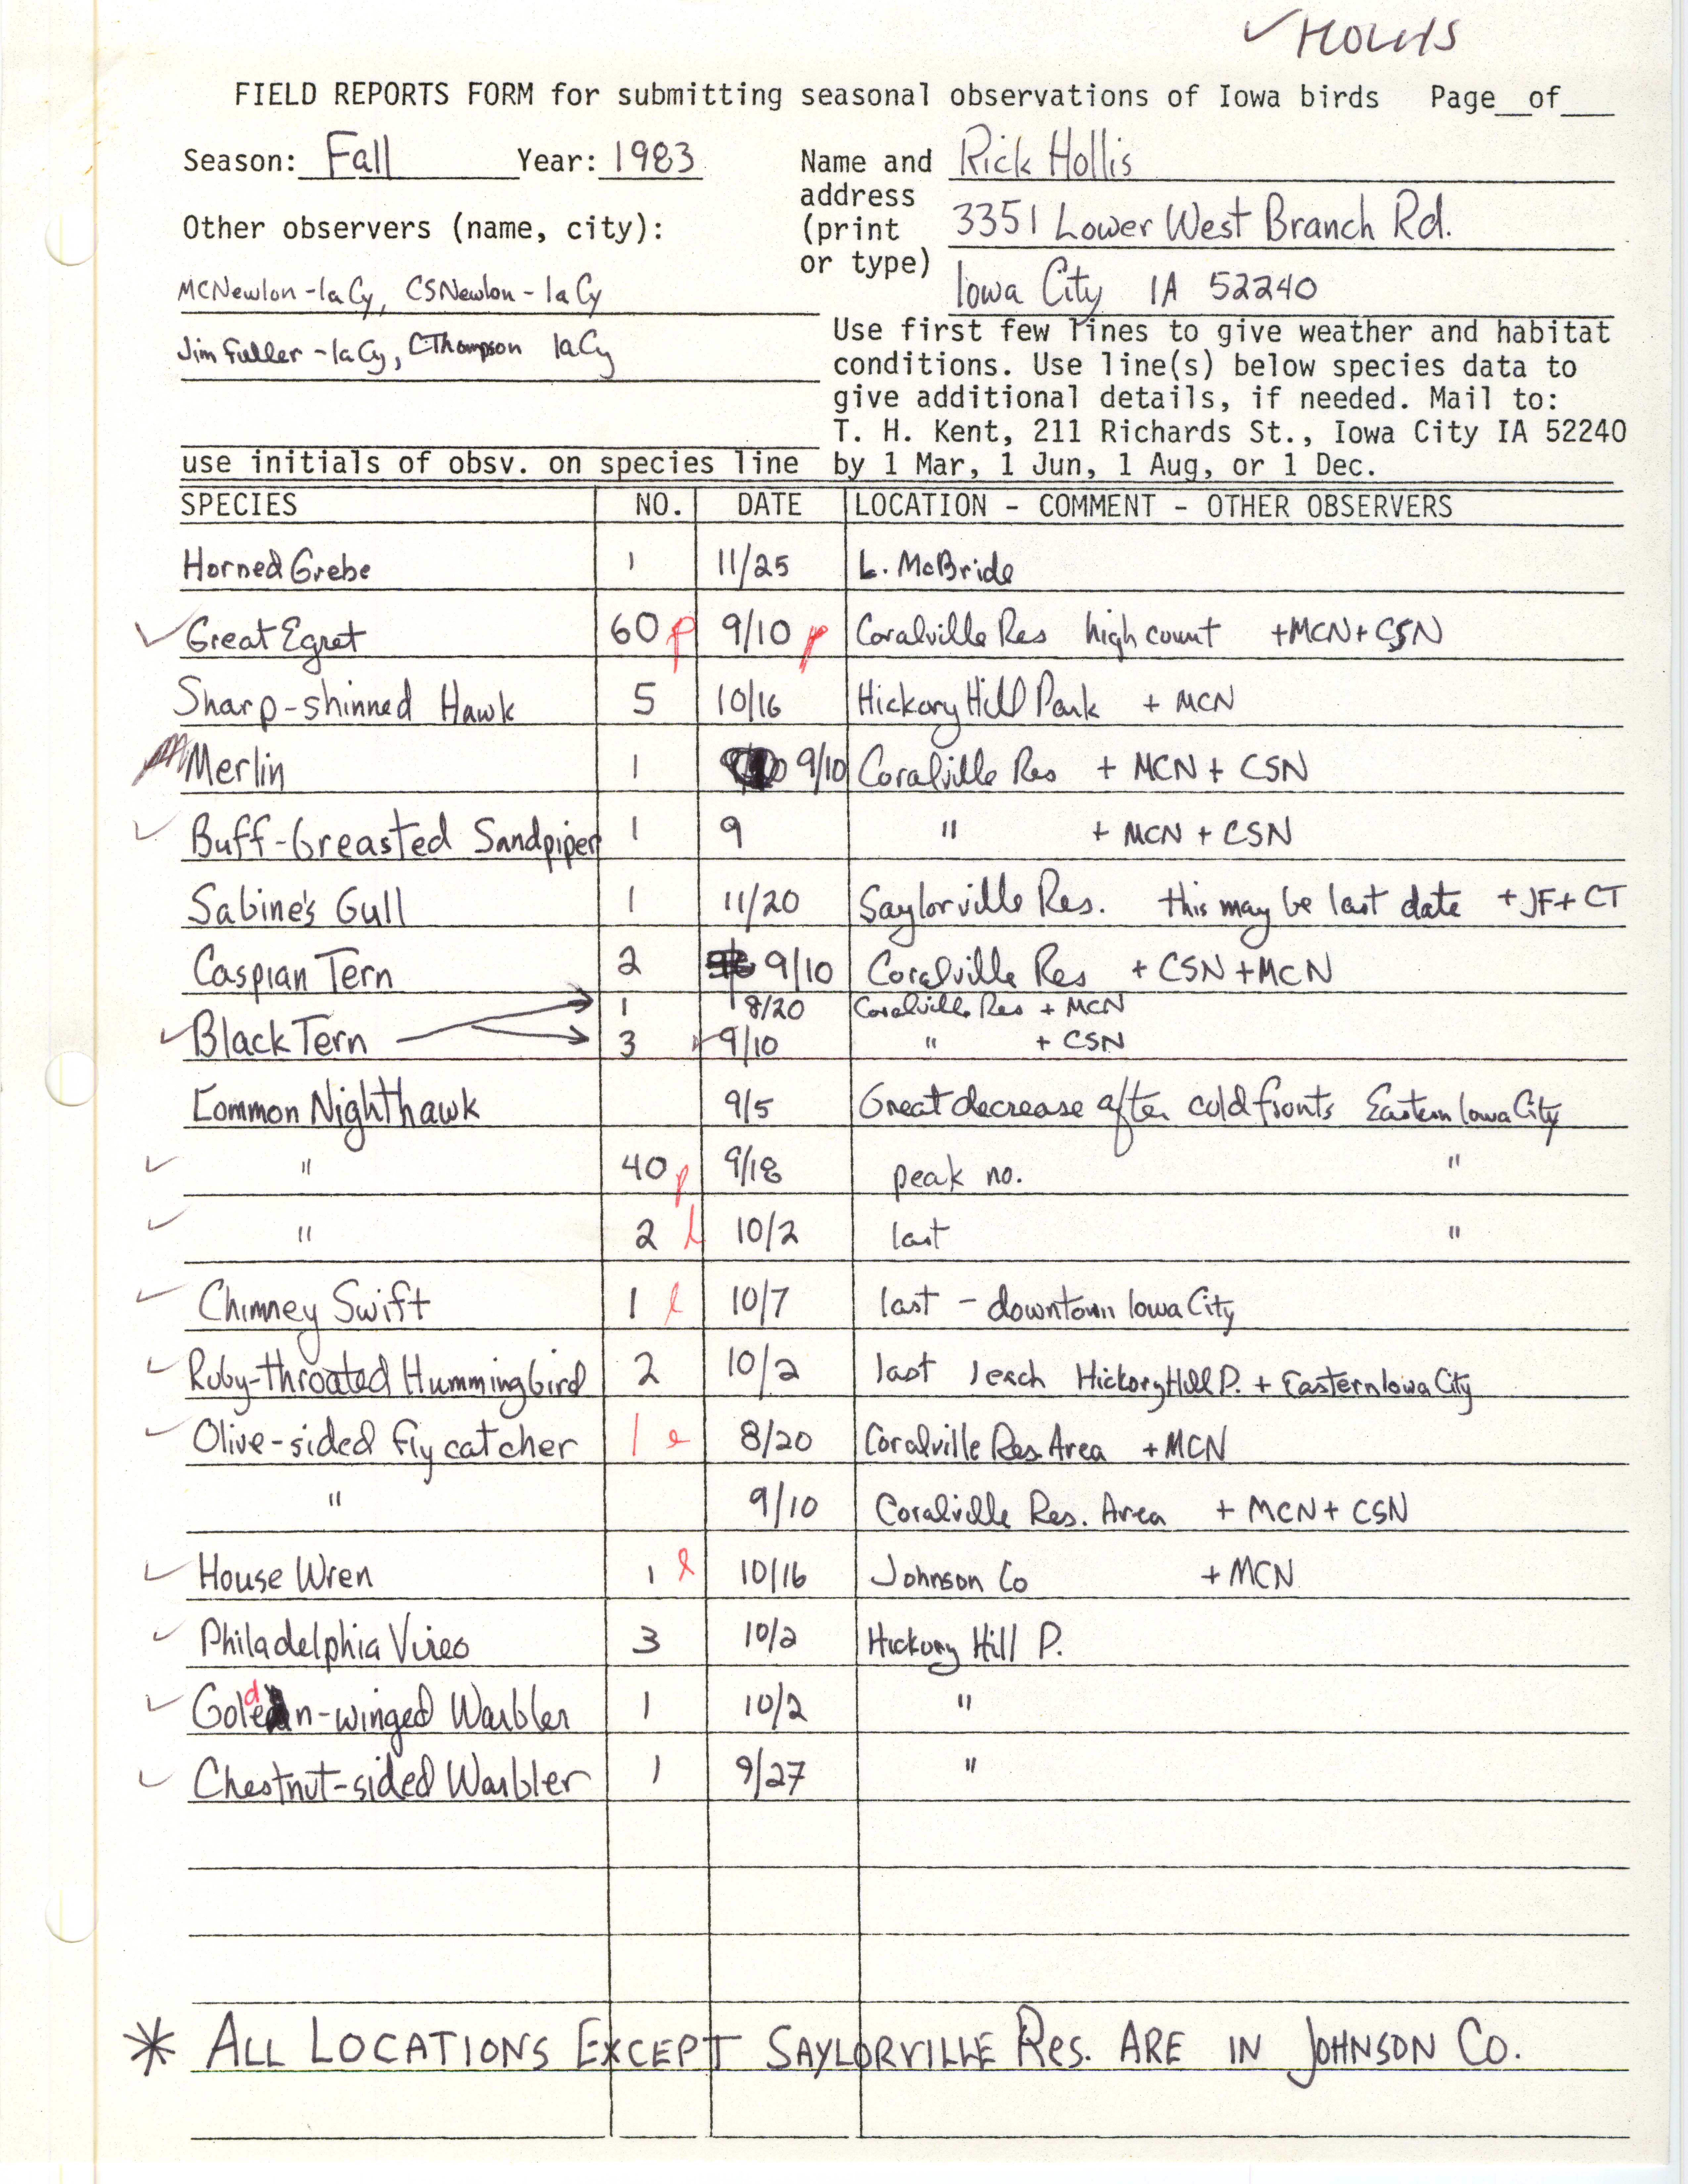 Field reports form for submitting seasonal observations of Iowa birds, Rick Hollis, fall 1983